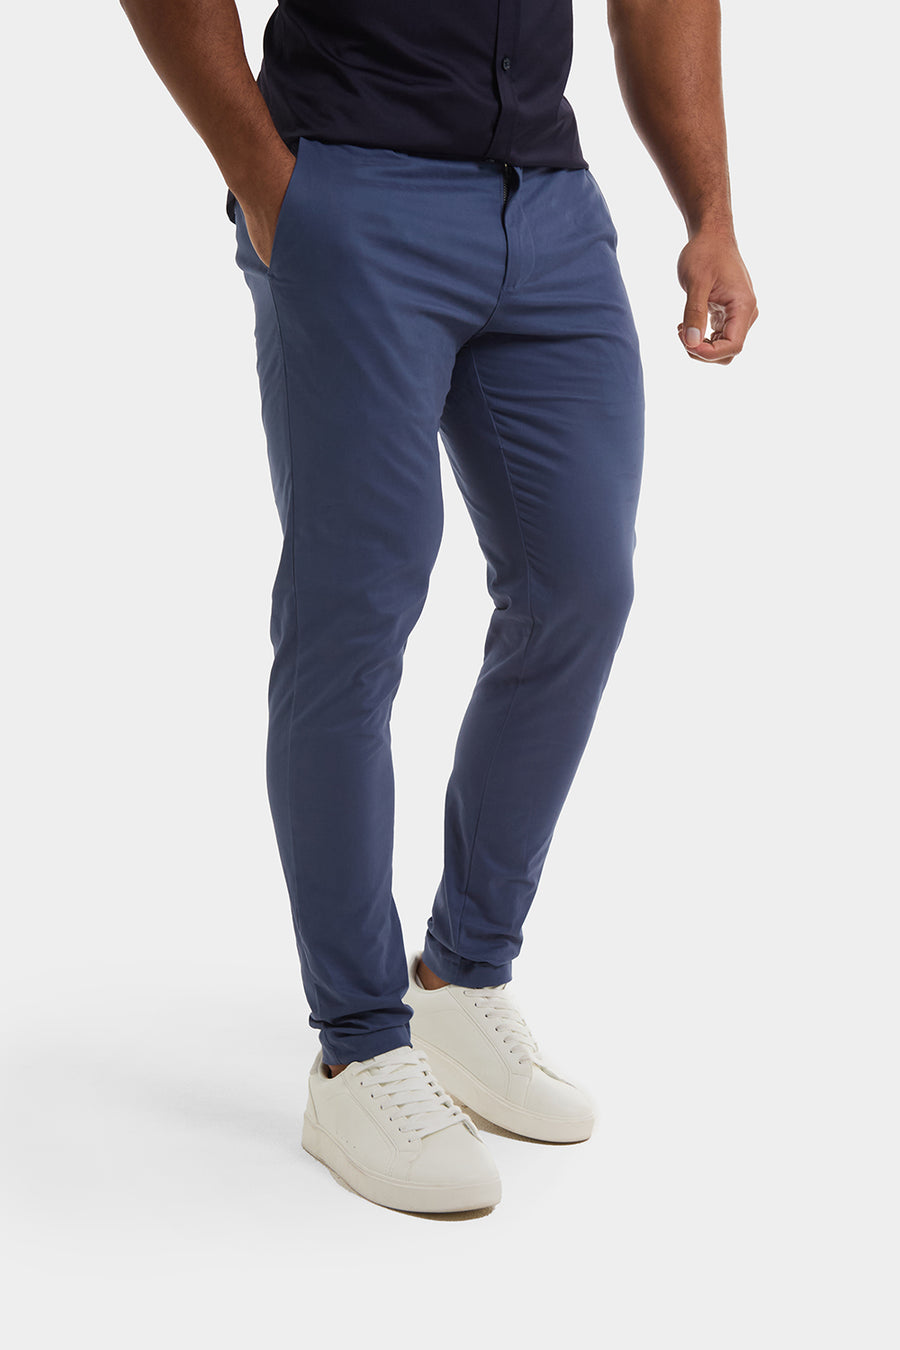 Athletic Fit Chino Pants in Airforce - TAILORED ATHLETE - USA